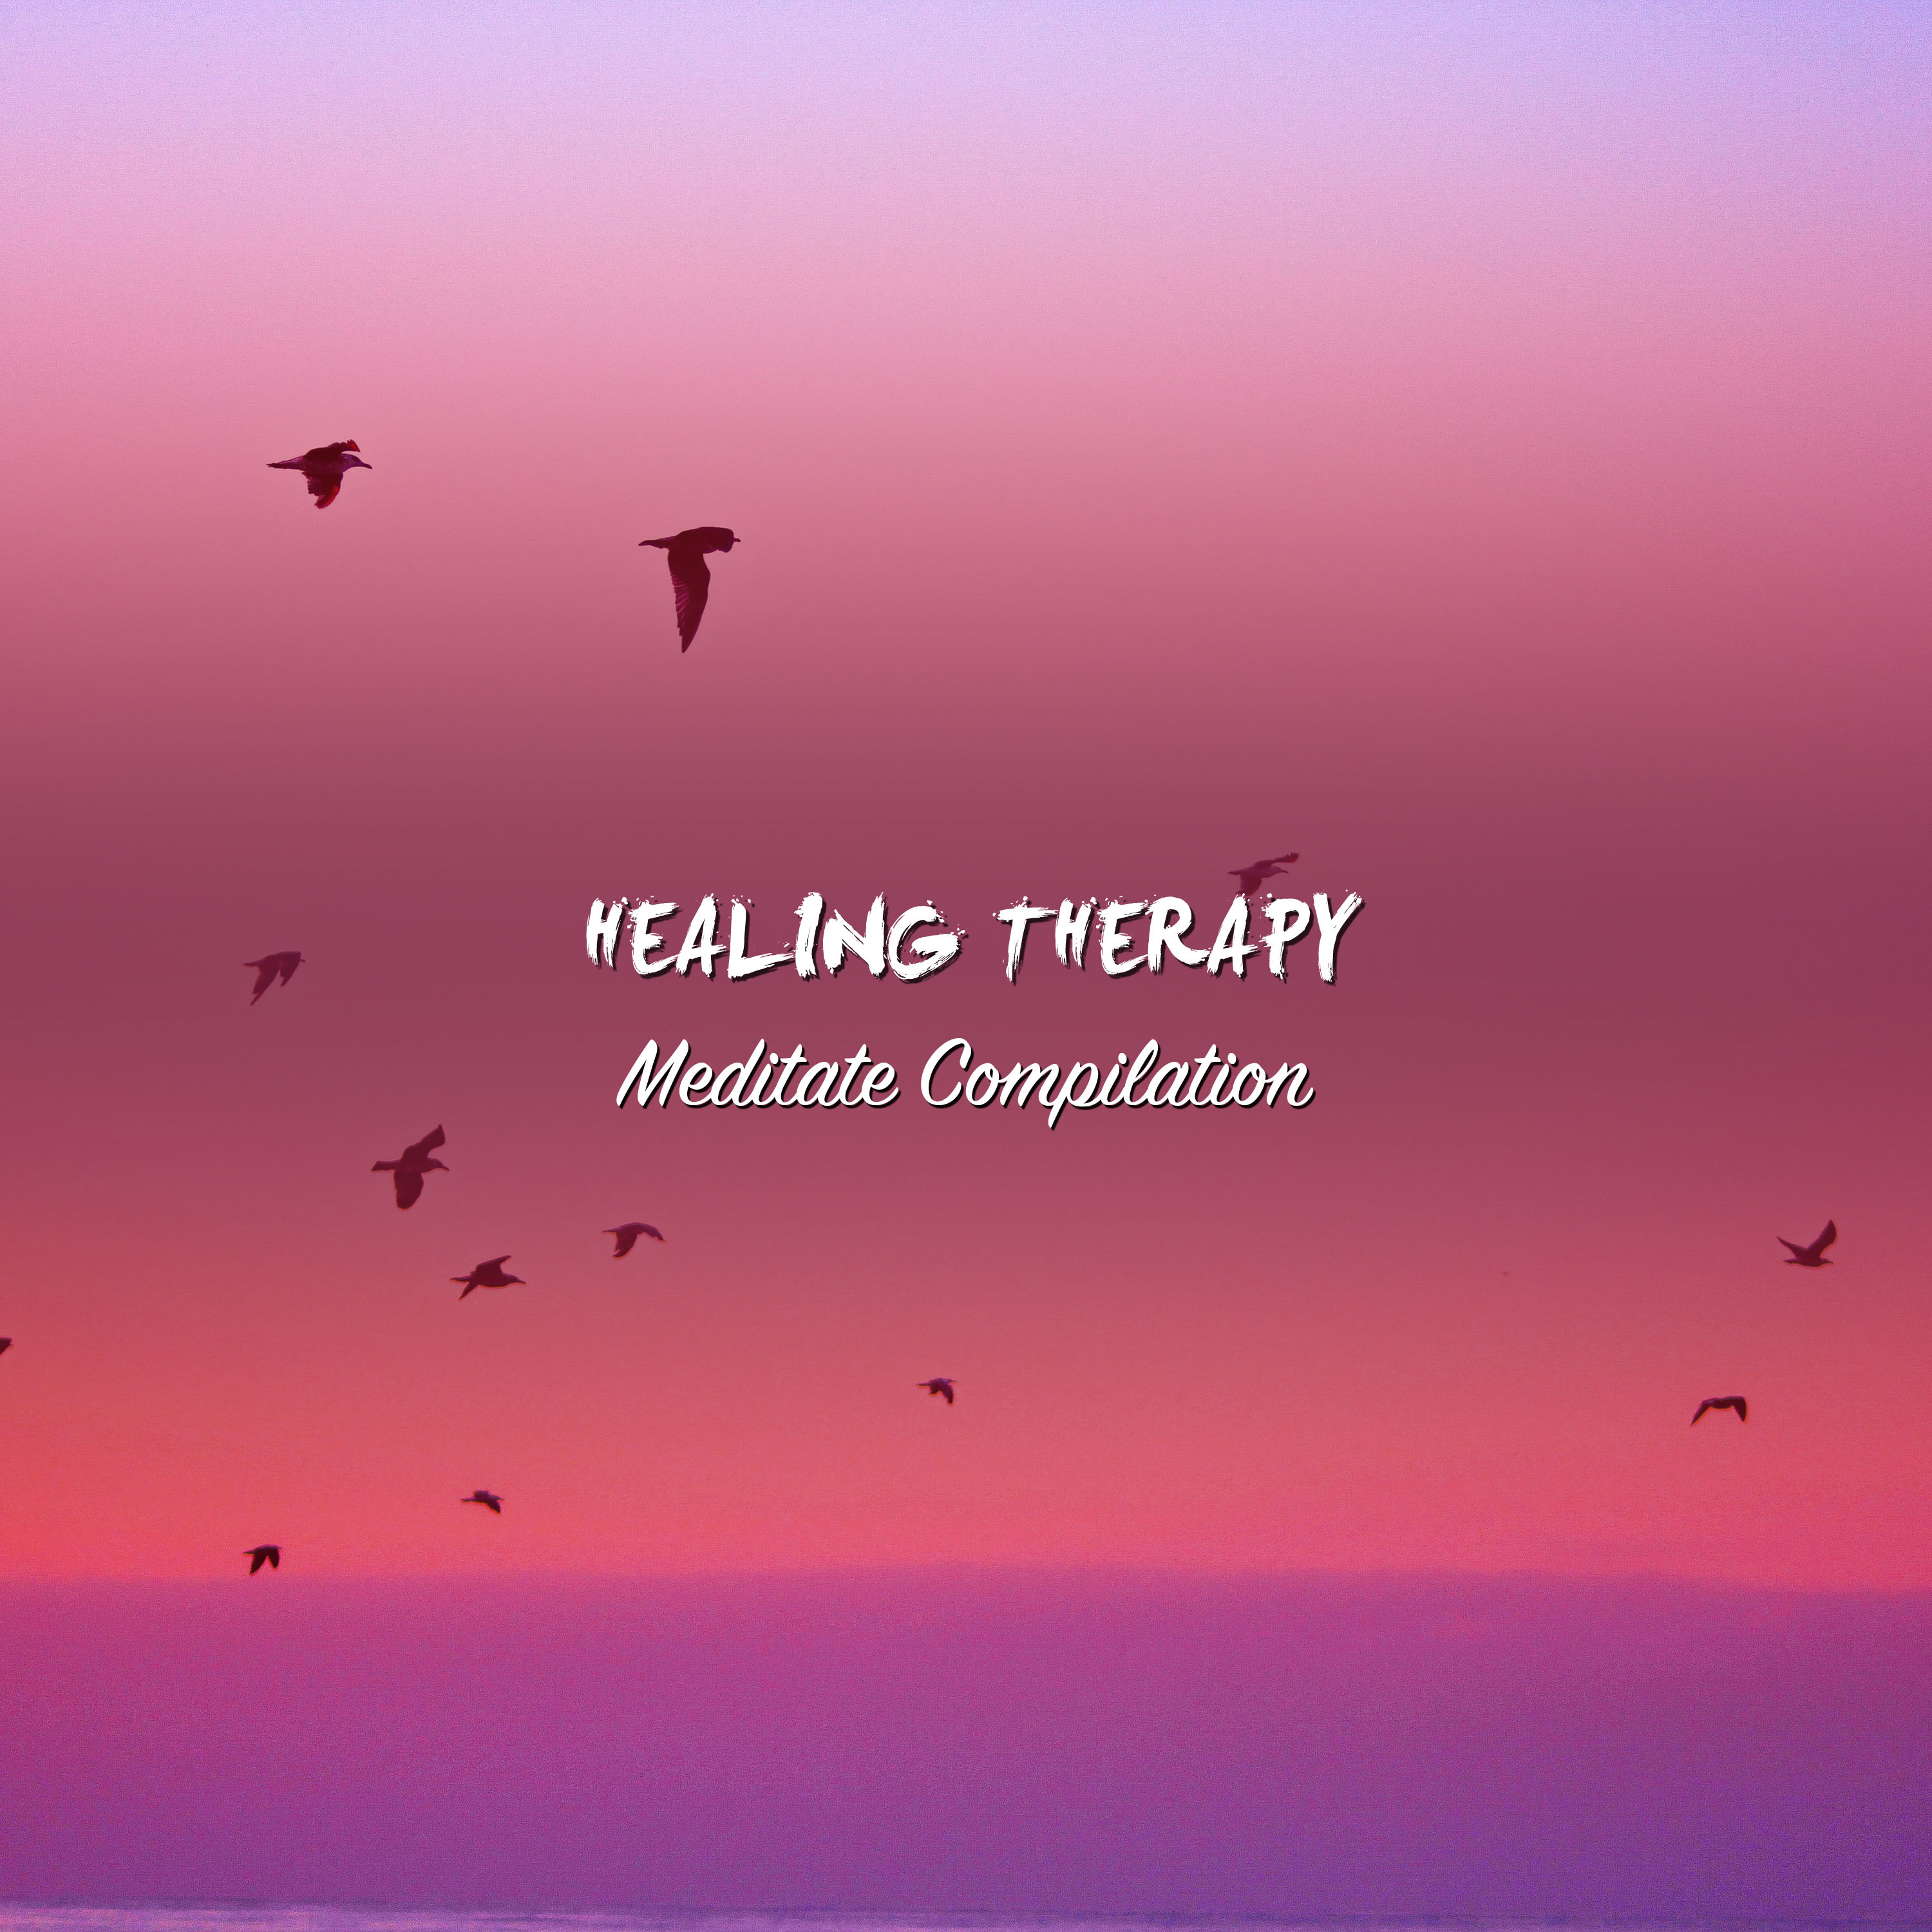 14 Healing Therapy Tracks - Zen Meditate Compilation